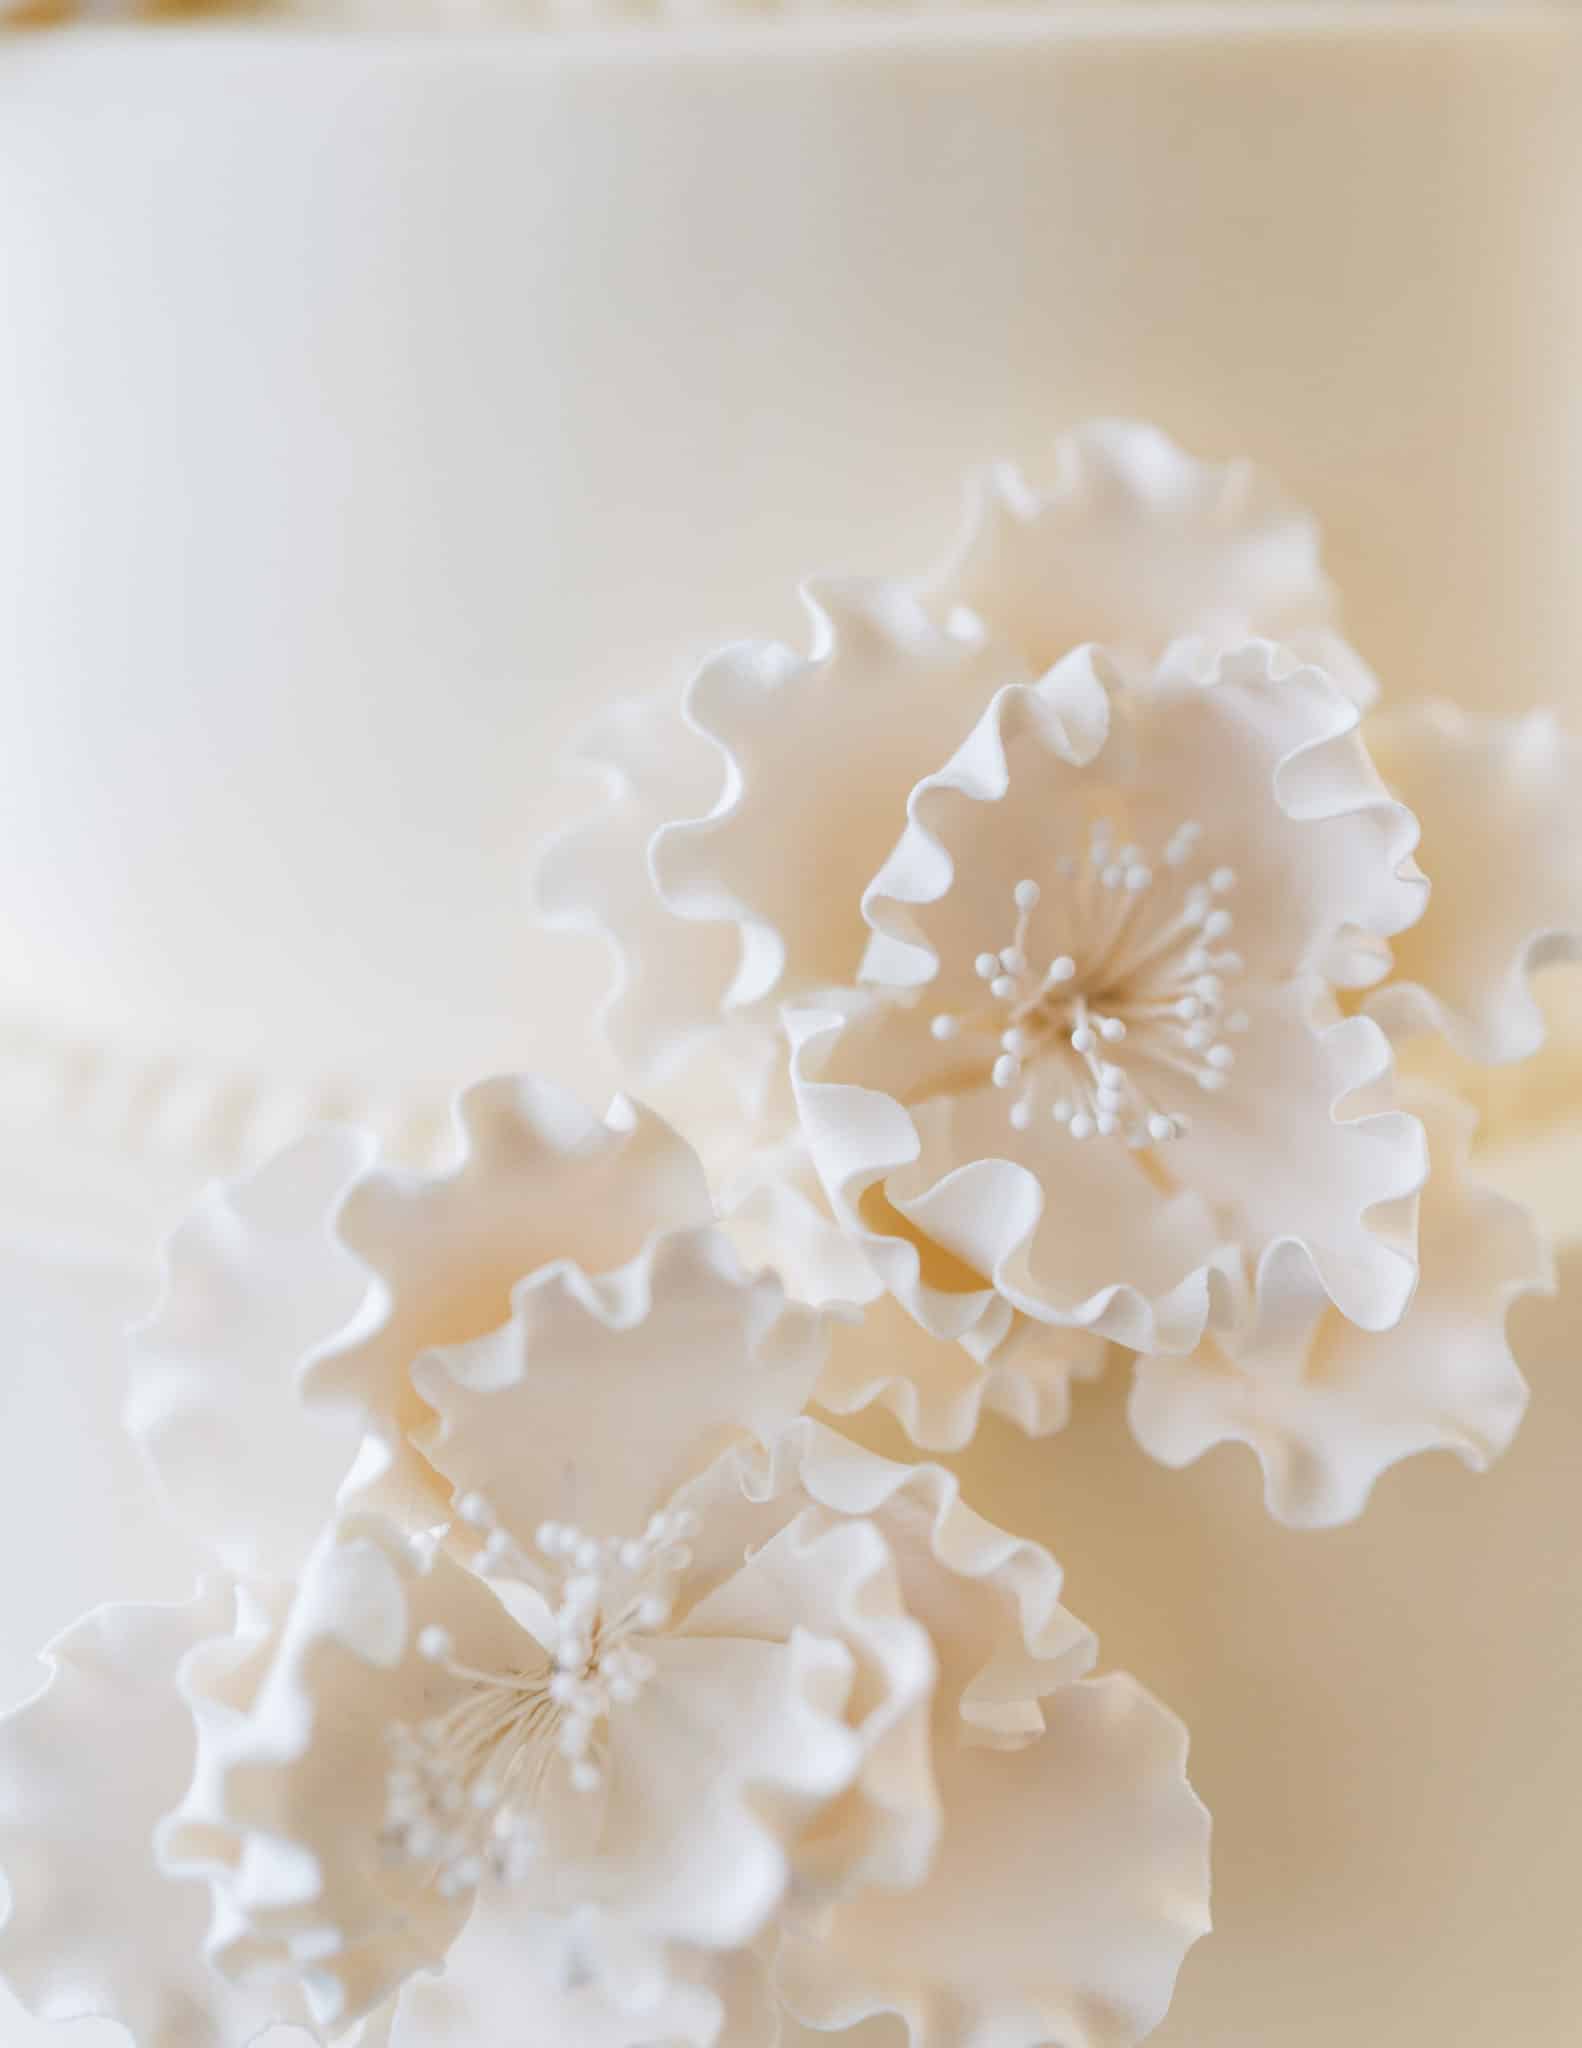 Gumpaste flower detail | Petite Sweets by Laura | Photo by Bailee Starr Photography